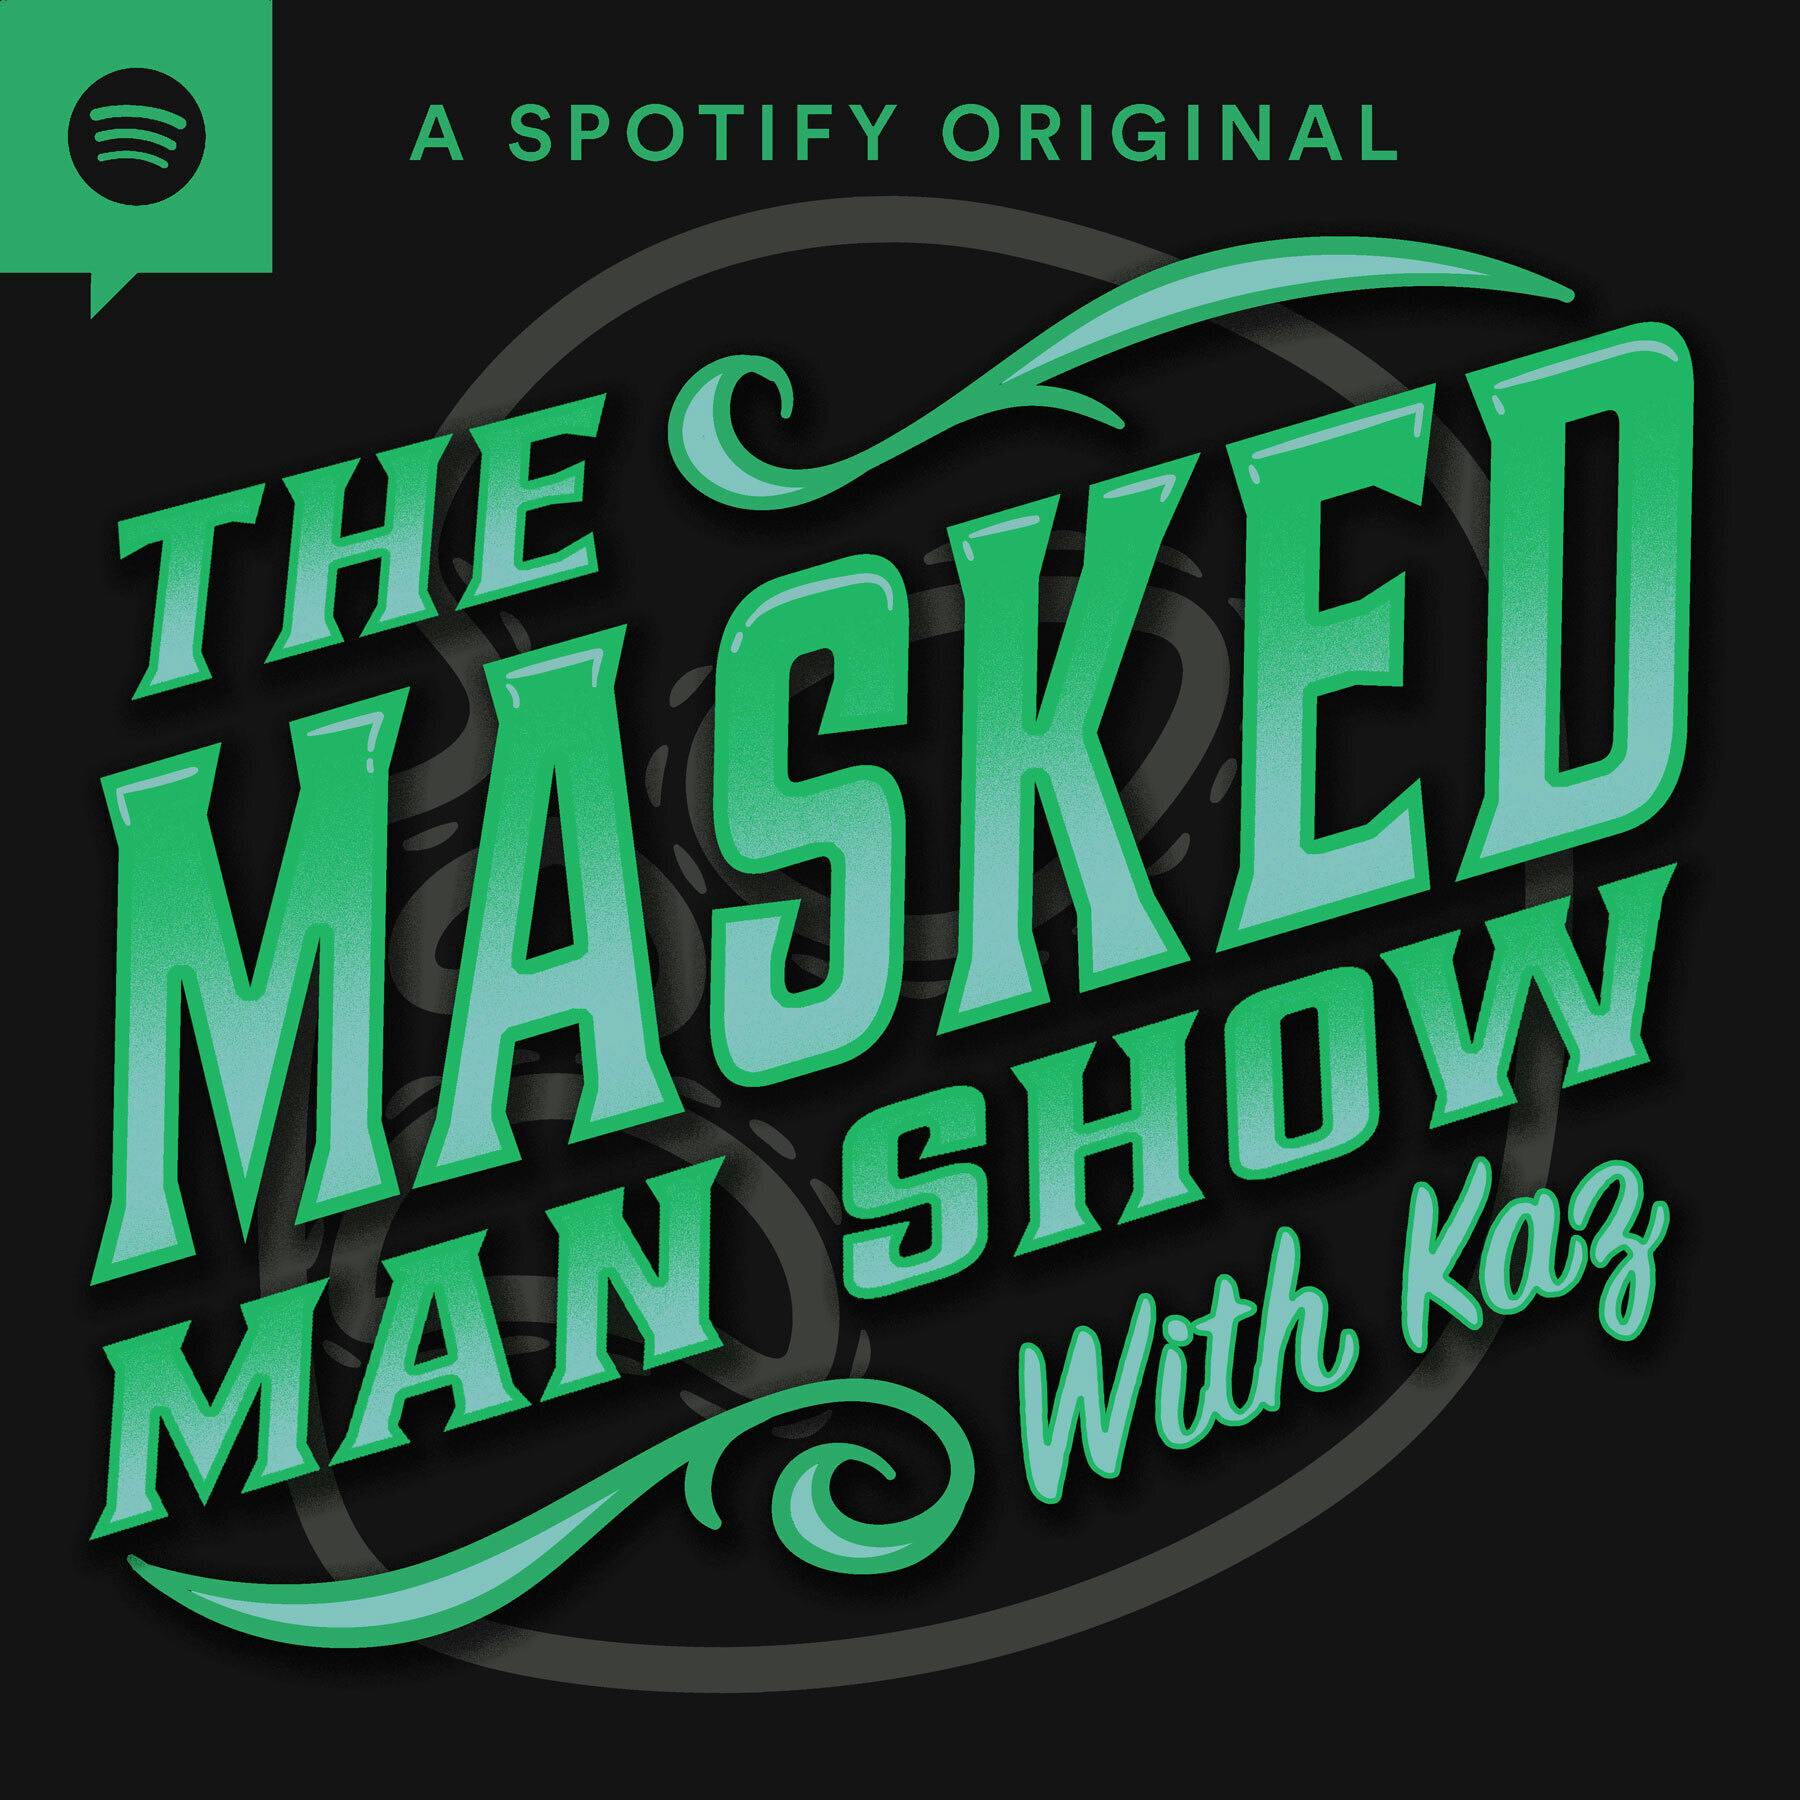 Guilty Pleasures in Pro Wrestling? Mailbag Episode of 'The Masked Man Show.'